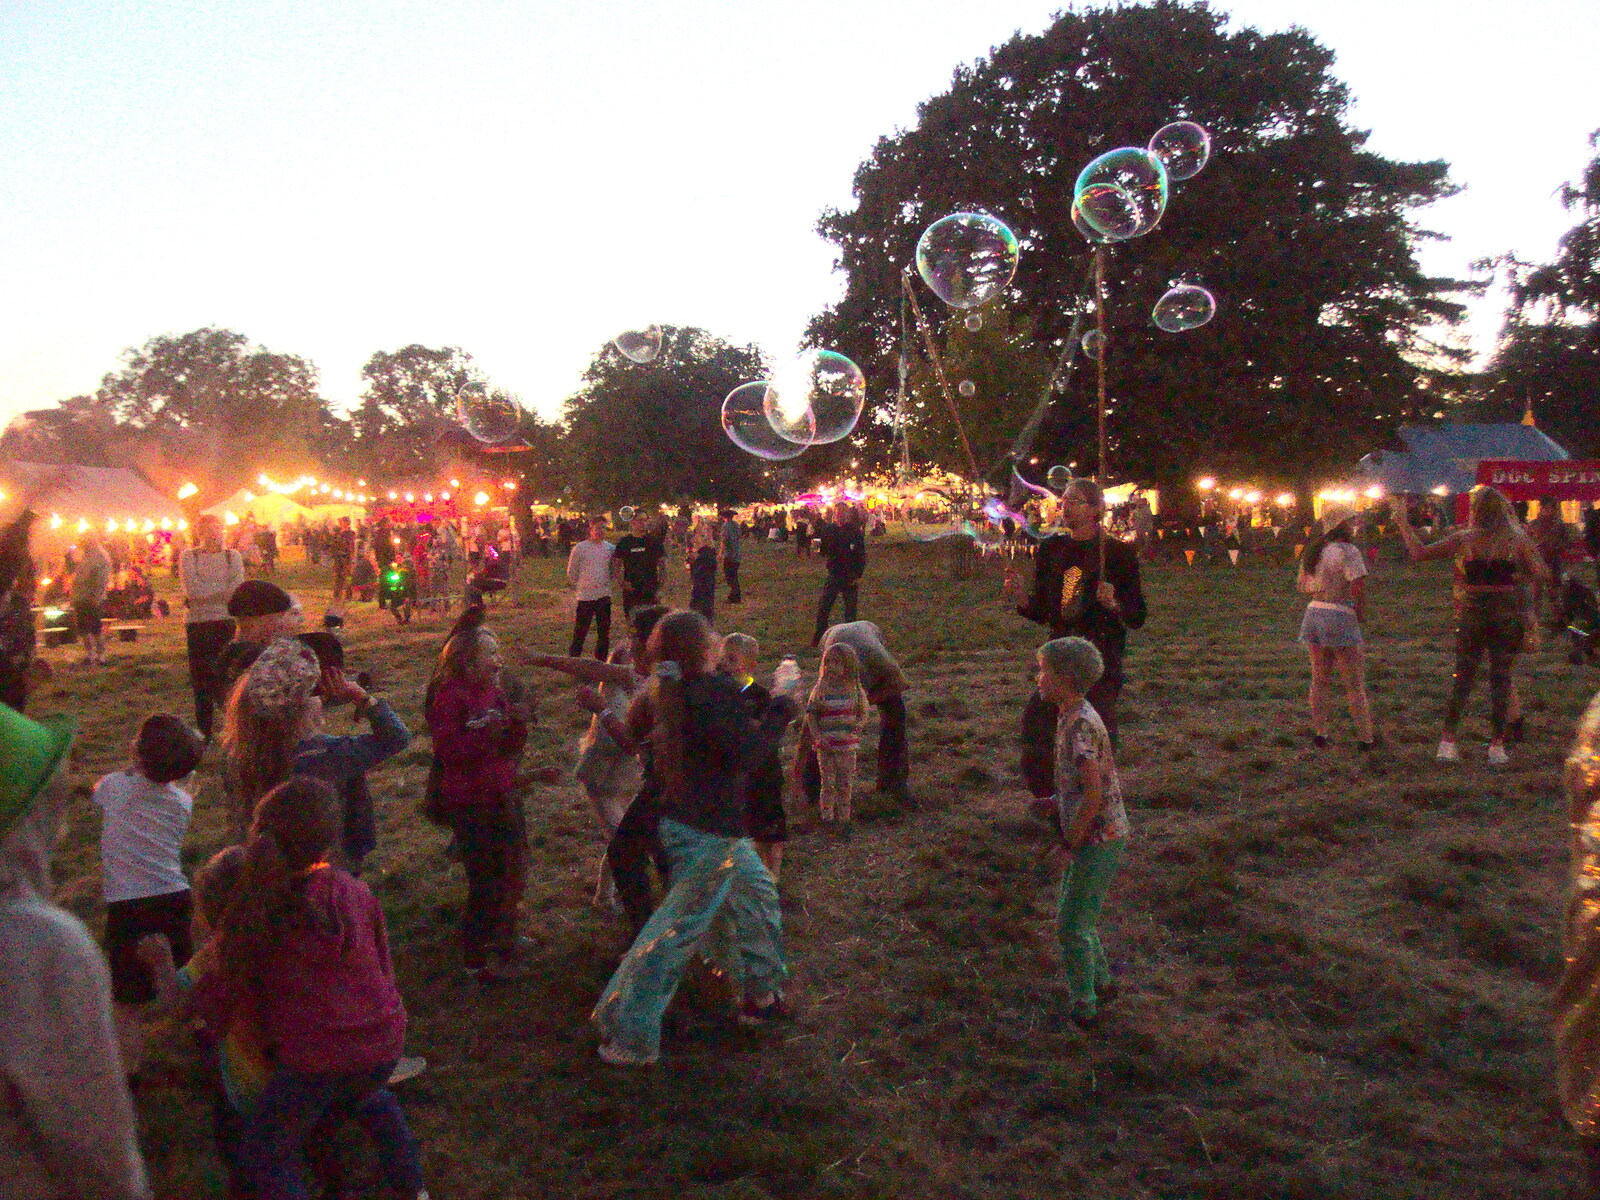 Children chase bubbles around from Maui Waui Festival, Hill Farm, Gressenhall, Norfolk - 28th August 2021